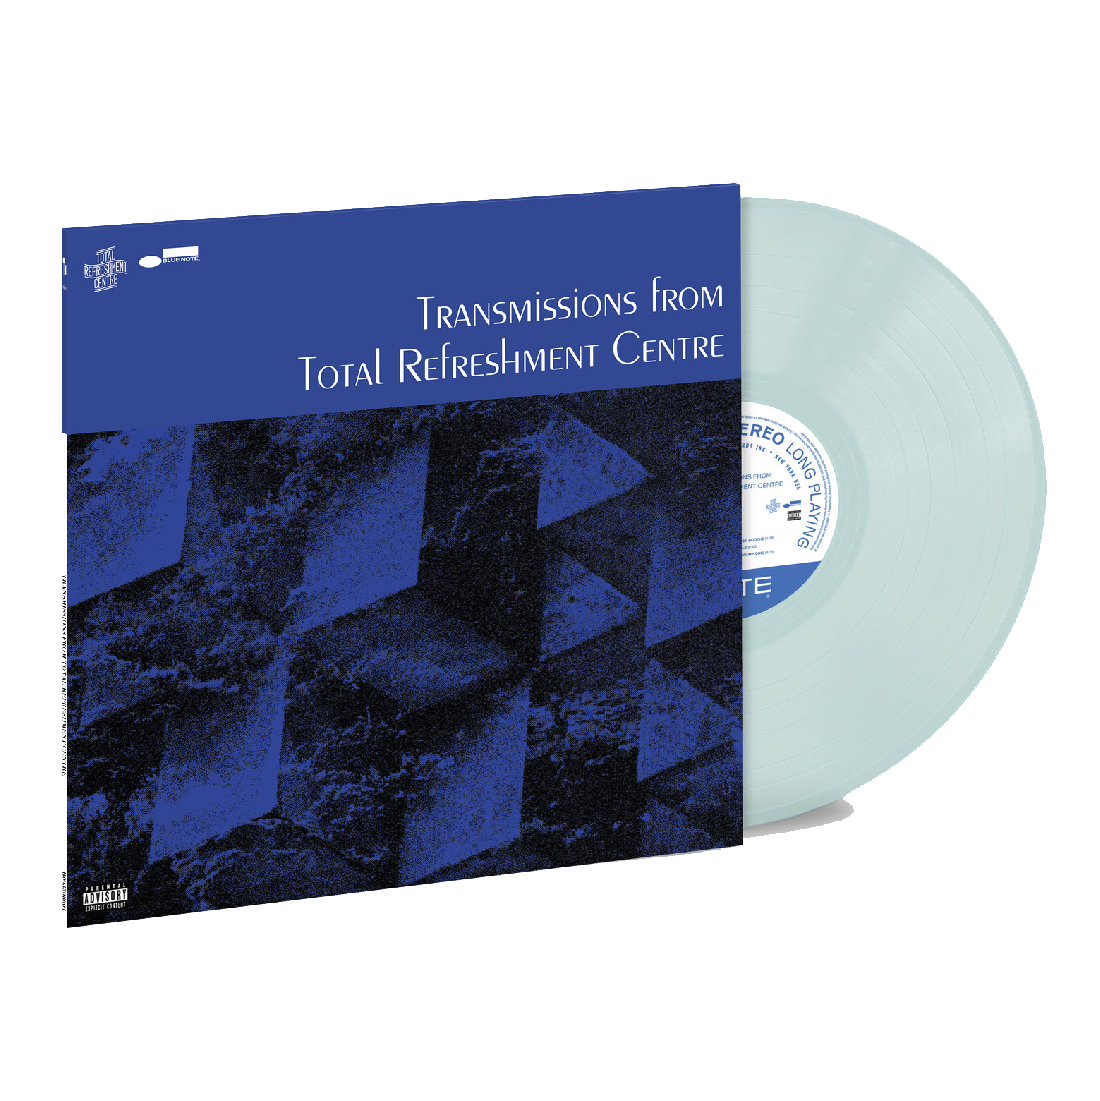 Transmissions from Total Refreshment Centre: Limited Colour Vinyl LP